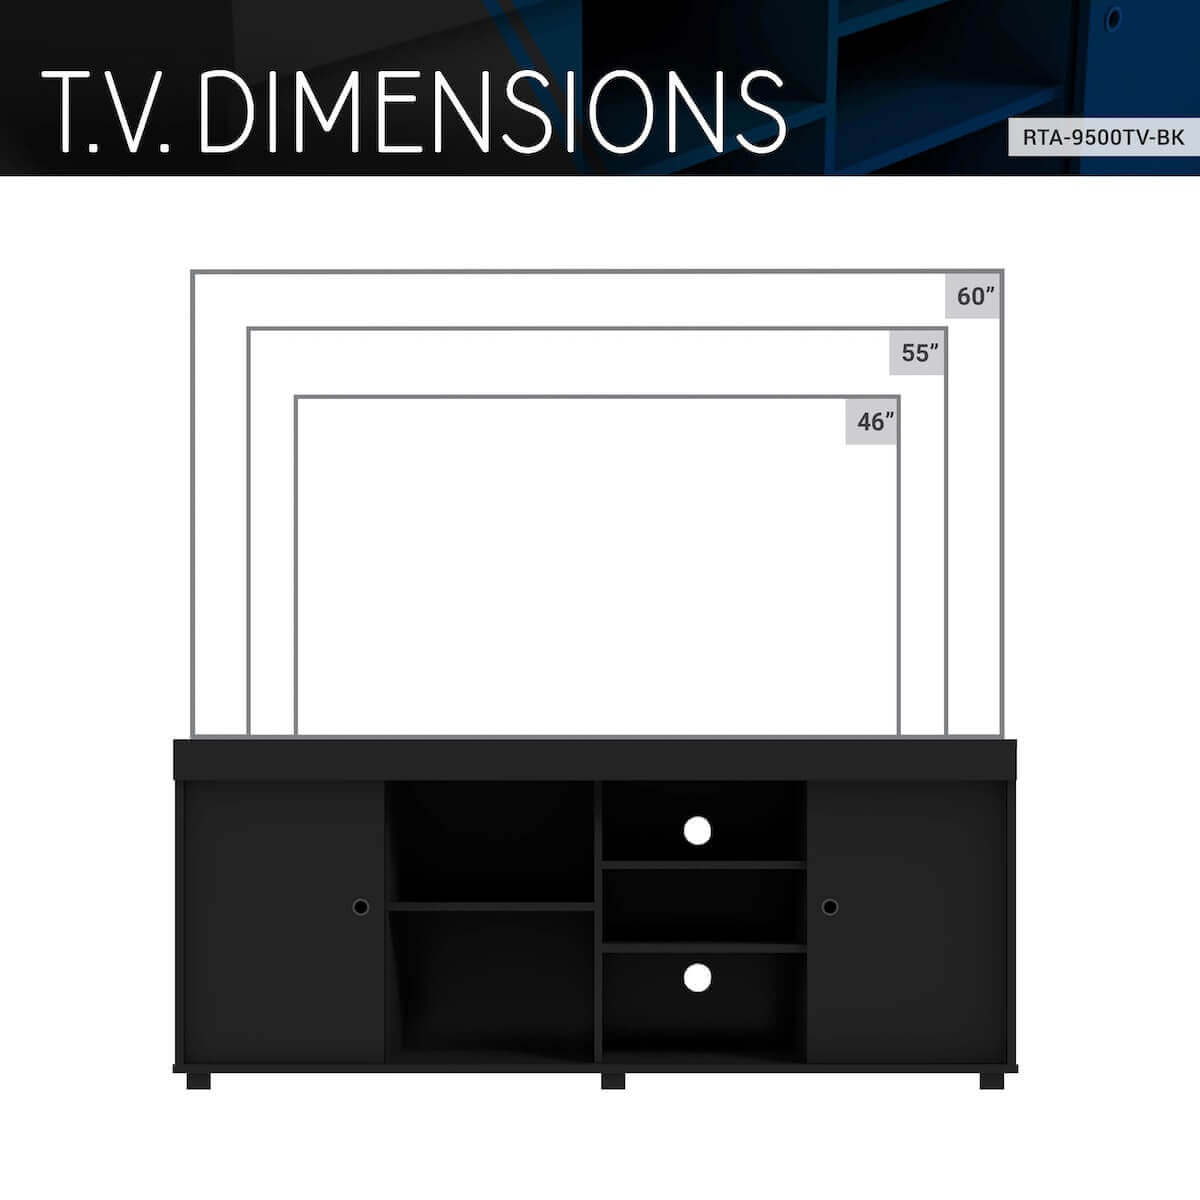 Techni Mobili TV Stand with Storage for TVs Up to 60" RTA-9500TV TV Dimensions